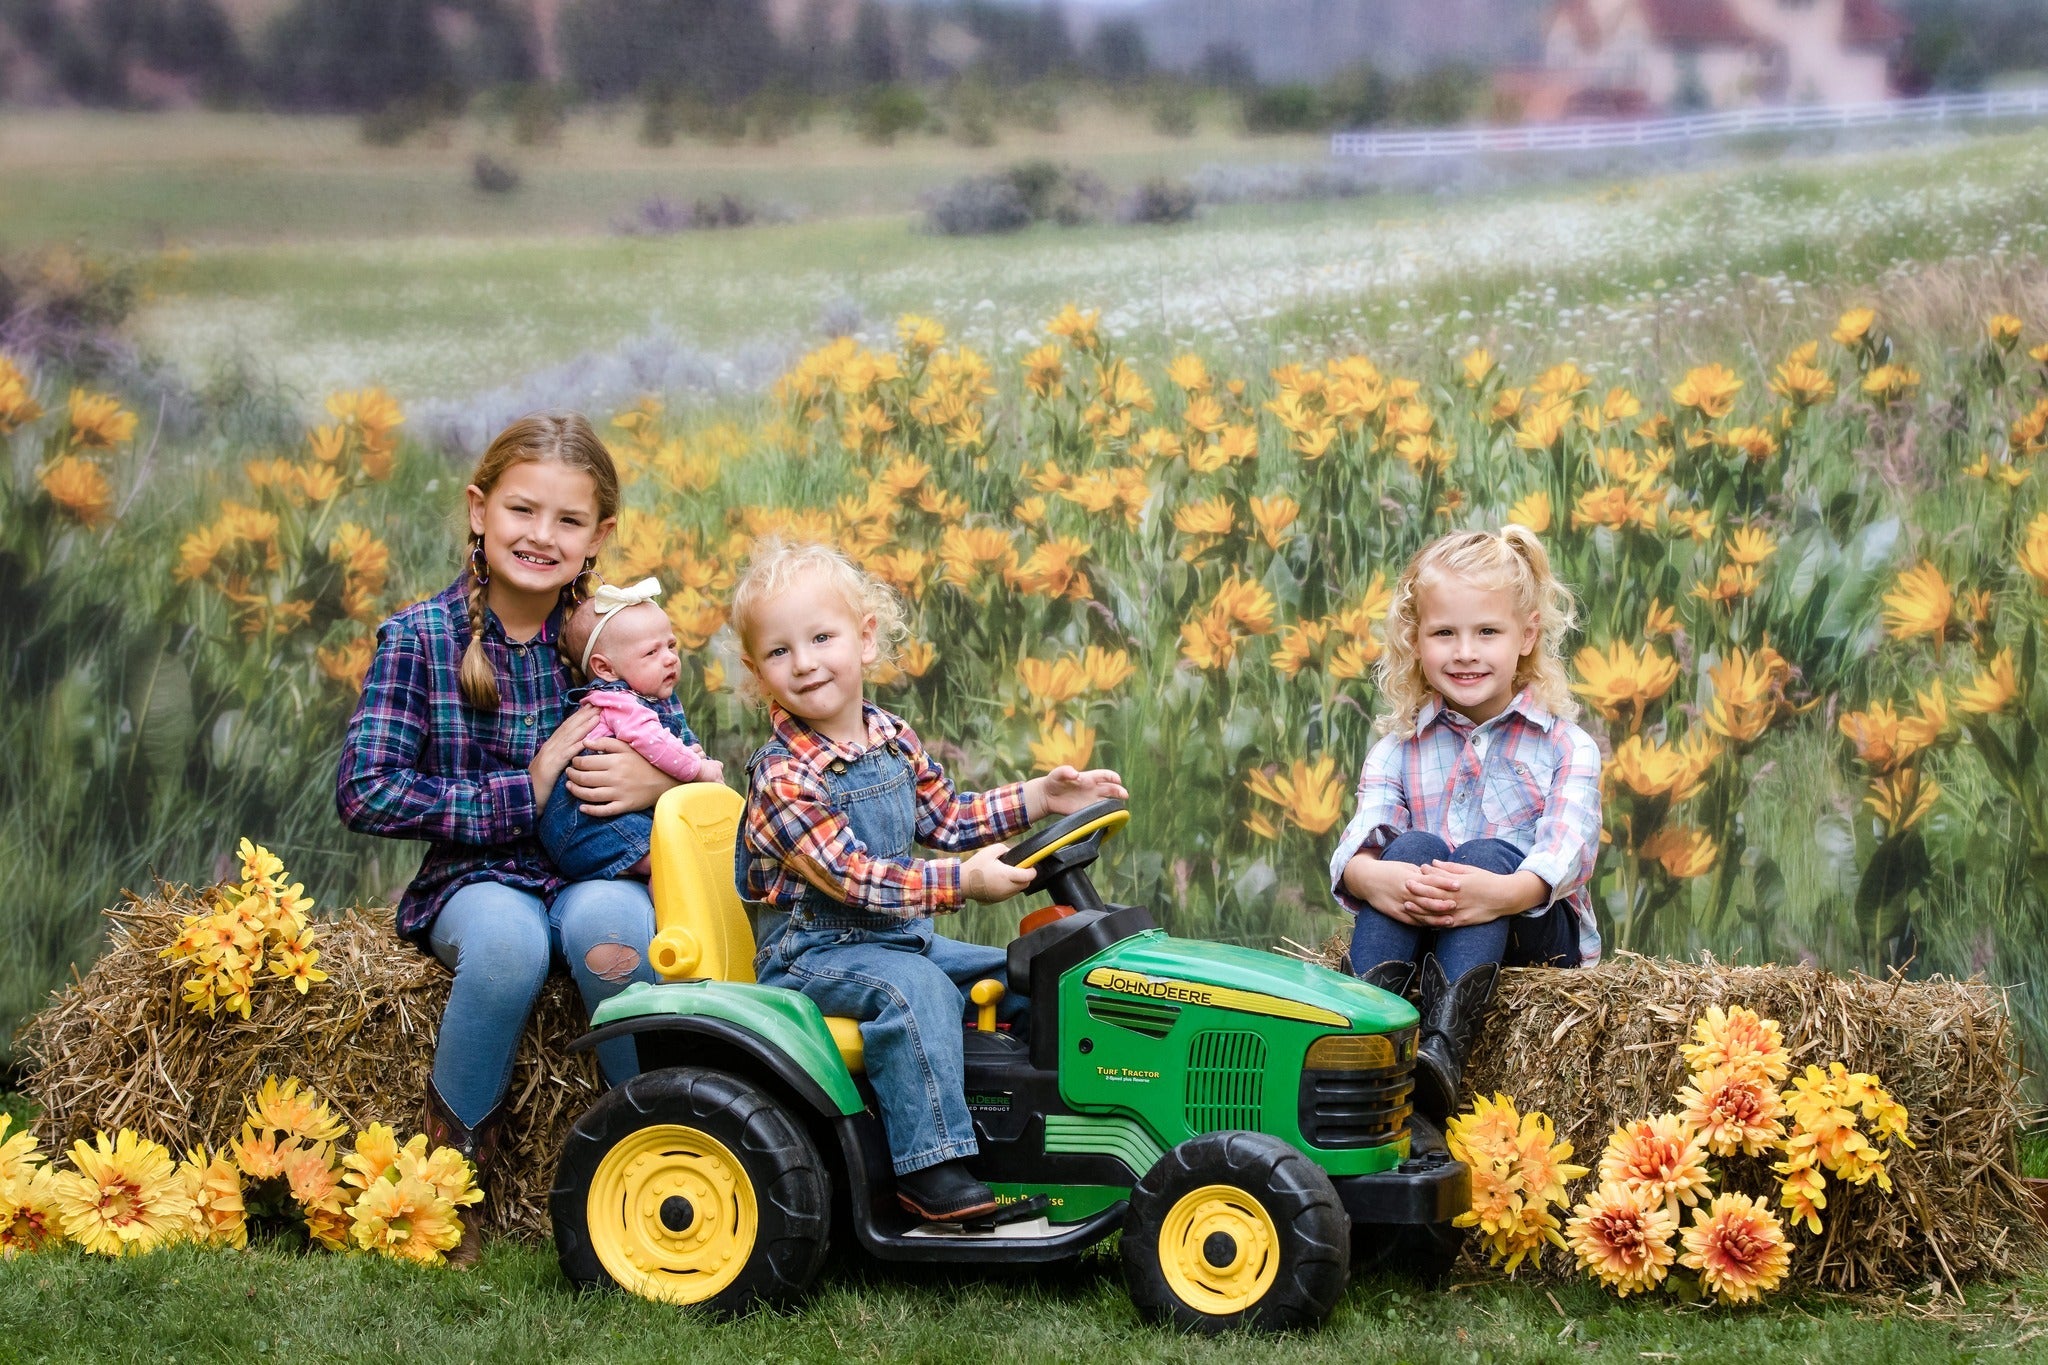 RTS Kate Mountain Meadow Summer Sunflowers Backdrop Designed by Lisa Granden